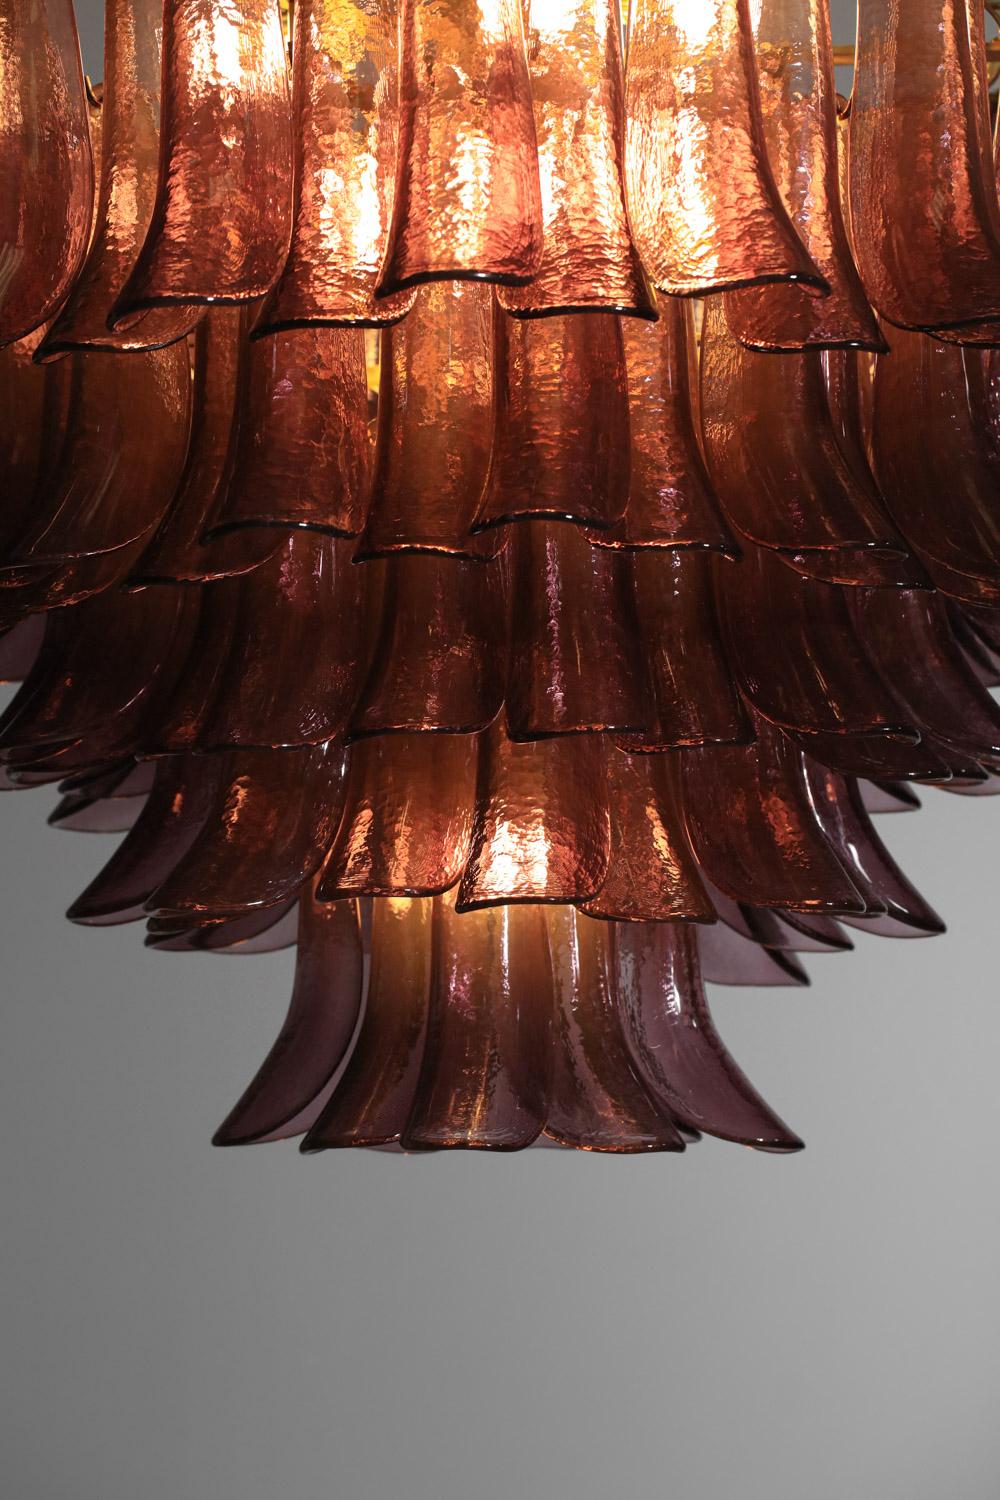 Large modern Italian Murano chandelier with palmettes 